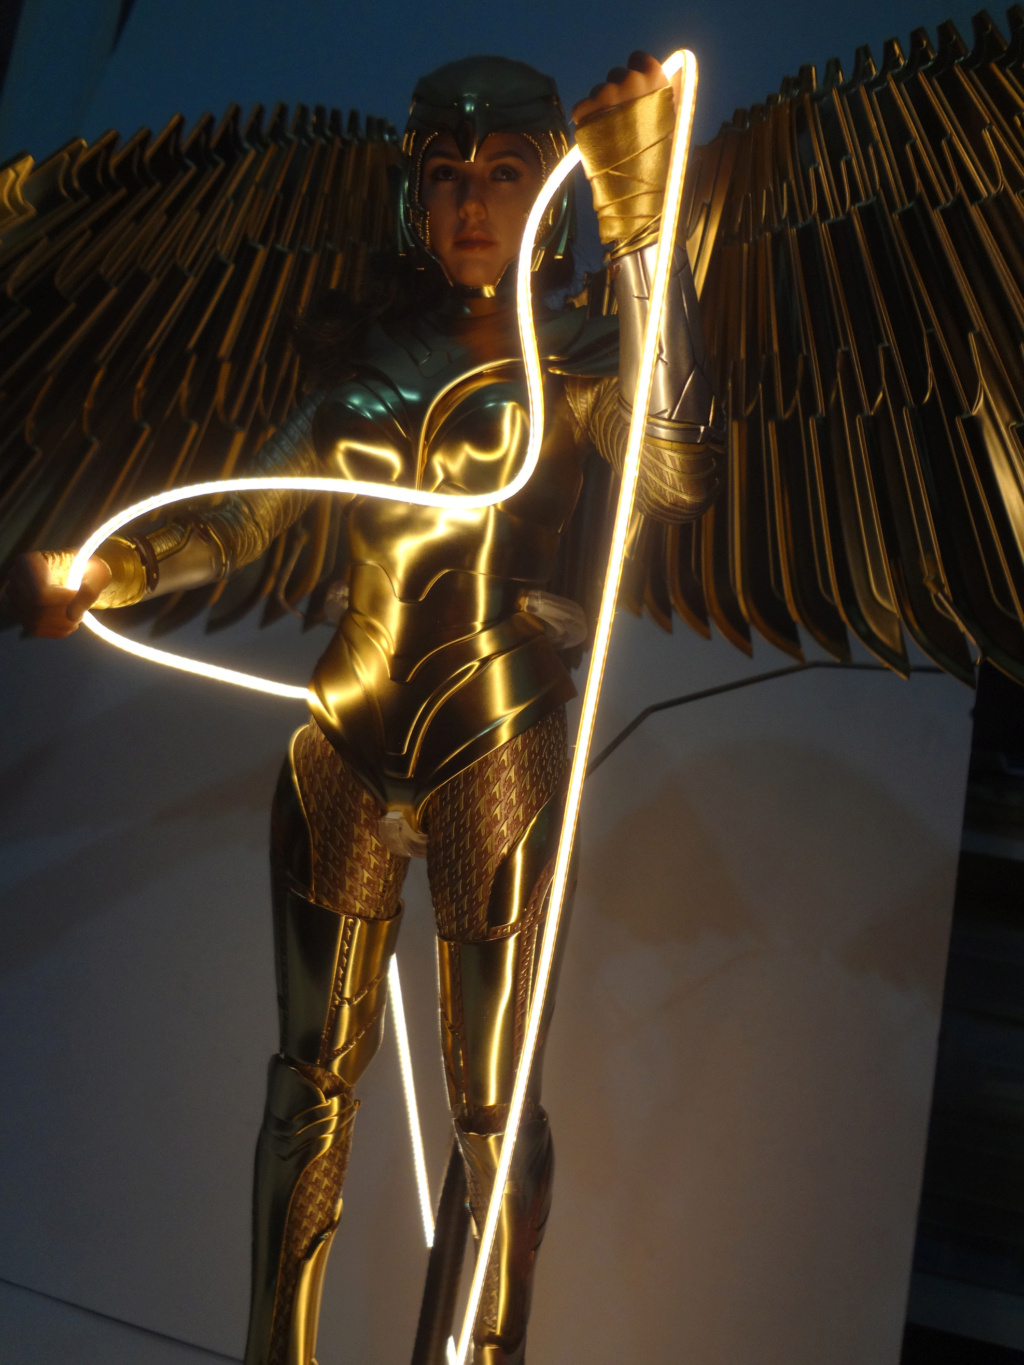 Female - NEW PRODUCT: HOT TOYS: WONDER WOMAN 1984: GOLDEN ARMOR WONDER WOMAN 1/6TH SCALE COLLECTIBLE FIGURE (Standard & Deluxe Versions) - Page 3 Dsc04217